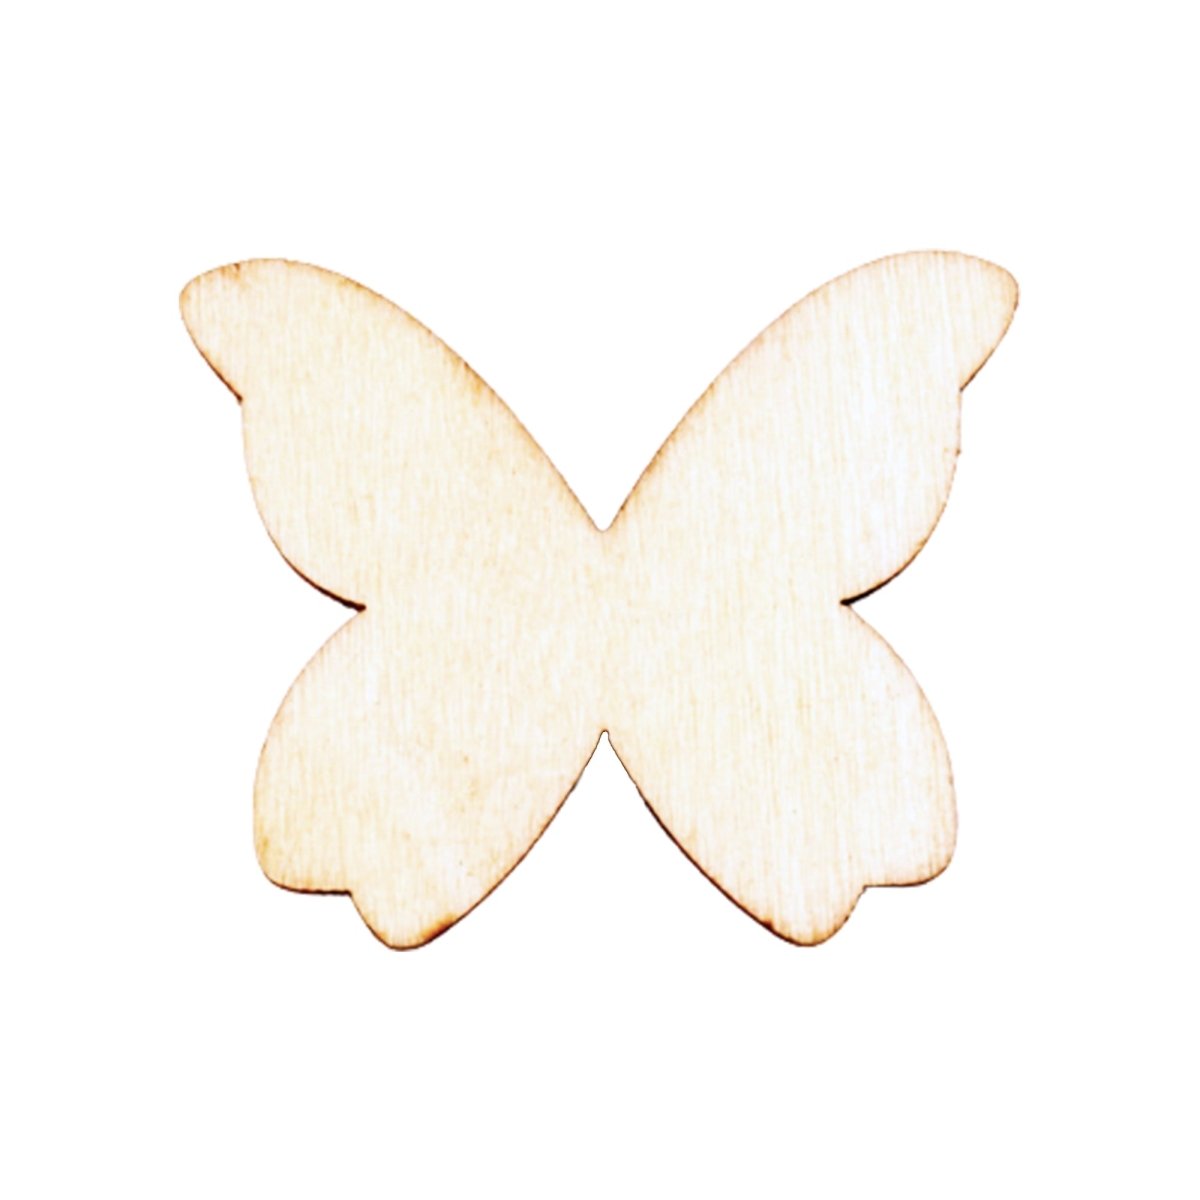 50pcs 15-40mm Natural Wooden Flower Butterfly Shape Blanks Forms Scrapbooking Crafts Sketching - 20mm Butterflies - - Asia Sell